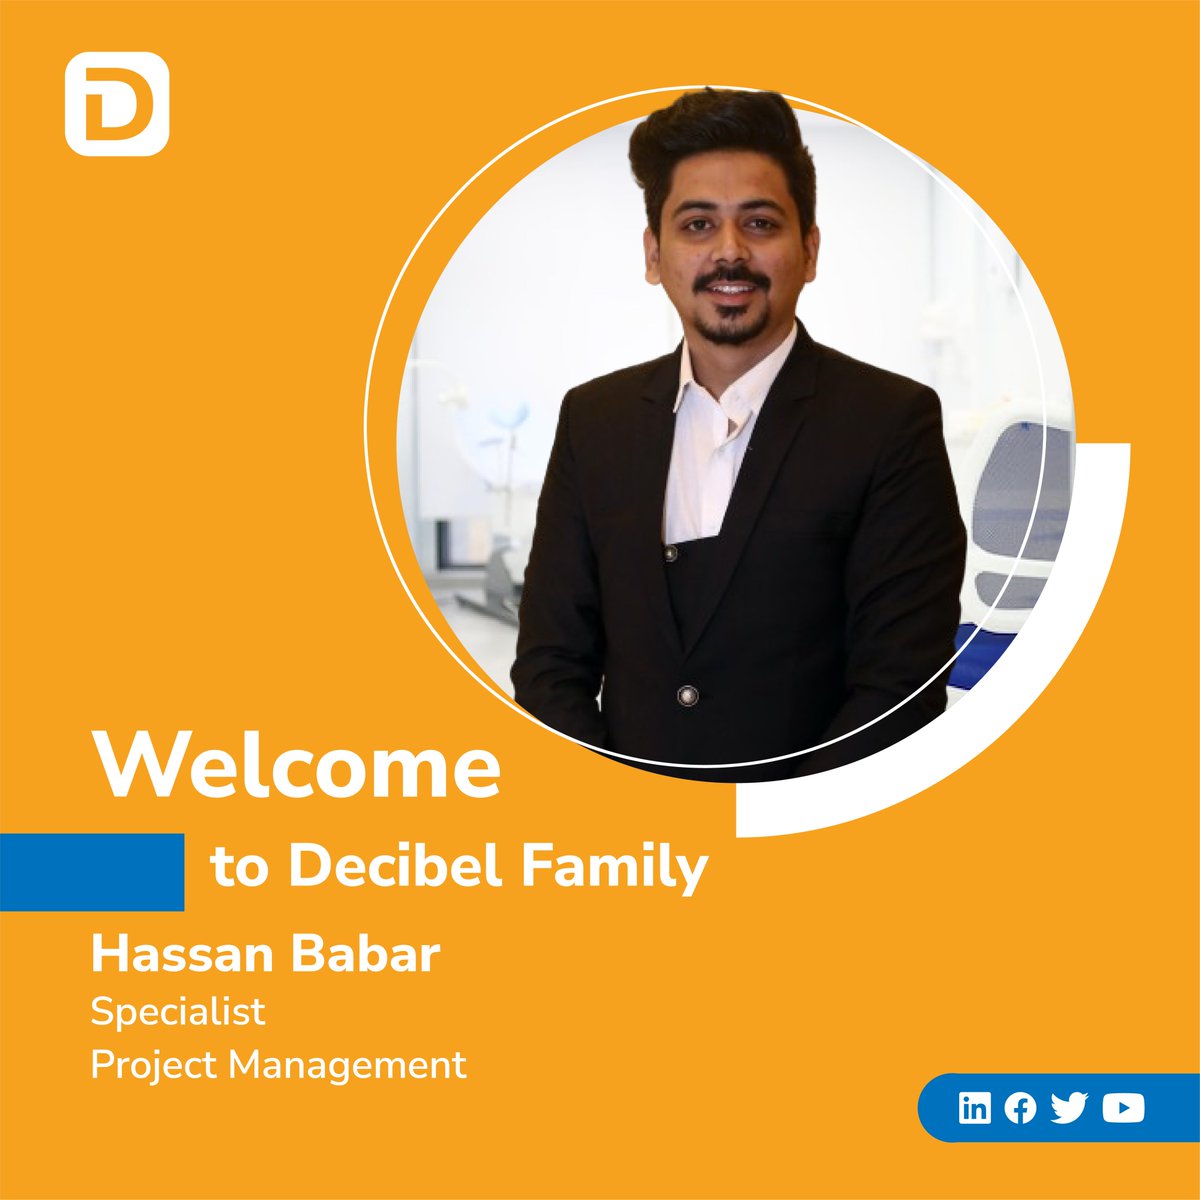 Thrilled to announce the newest addition to our family! Join us in extending a warm welcome to the latest members on board.

Welcome aboard!

#NewBeginnings #WelcomeAboard #TeamExpansion #NewHires #DecibelHRMS #Decibel #Family #NewChapter #DigitalTransformation #Pakistan